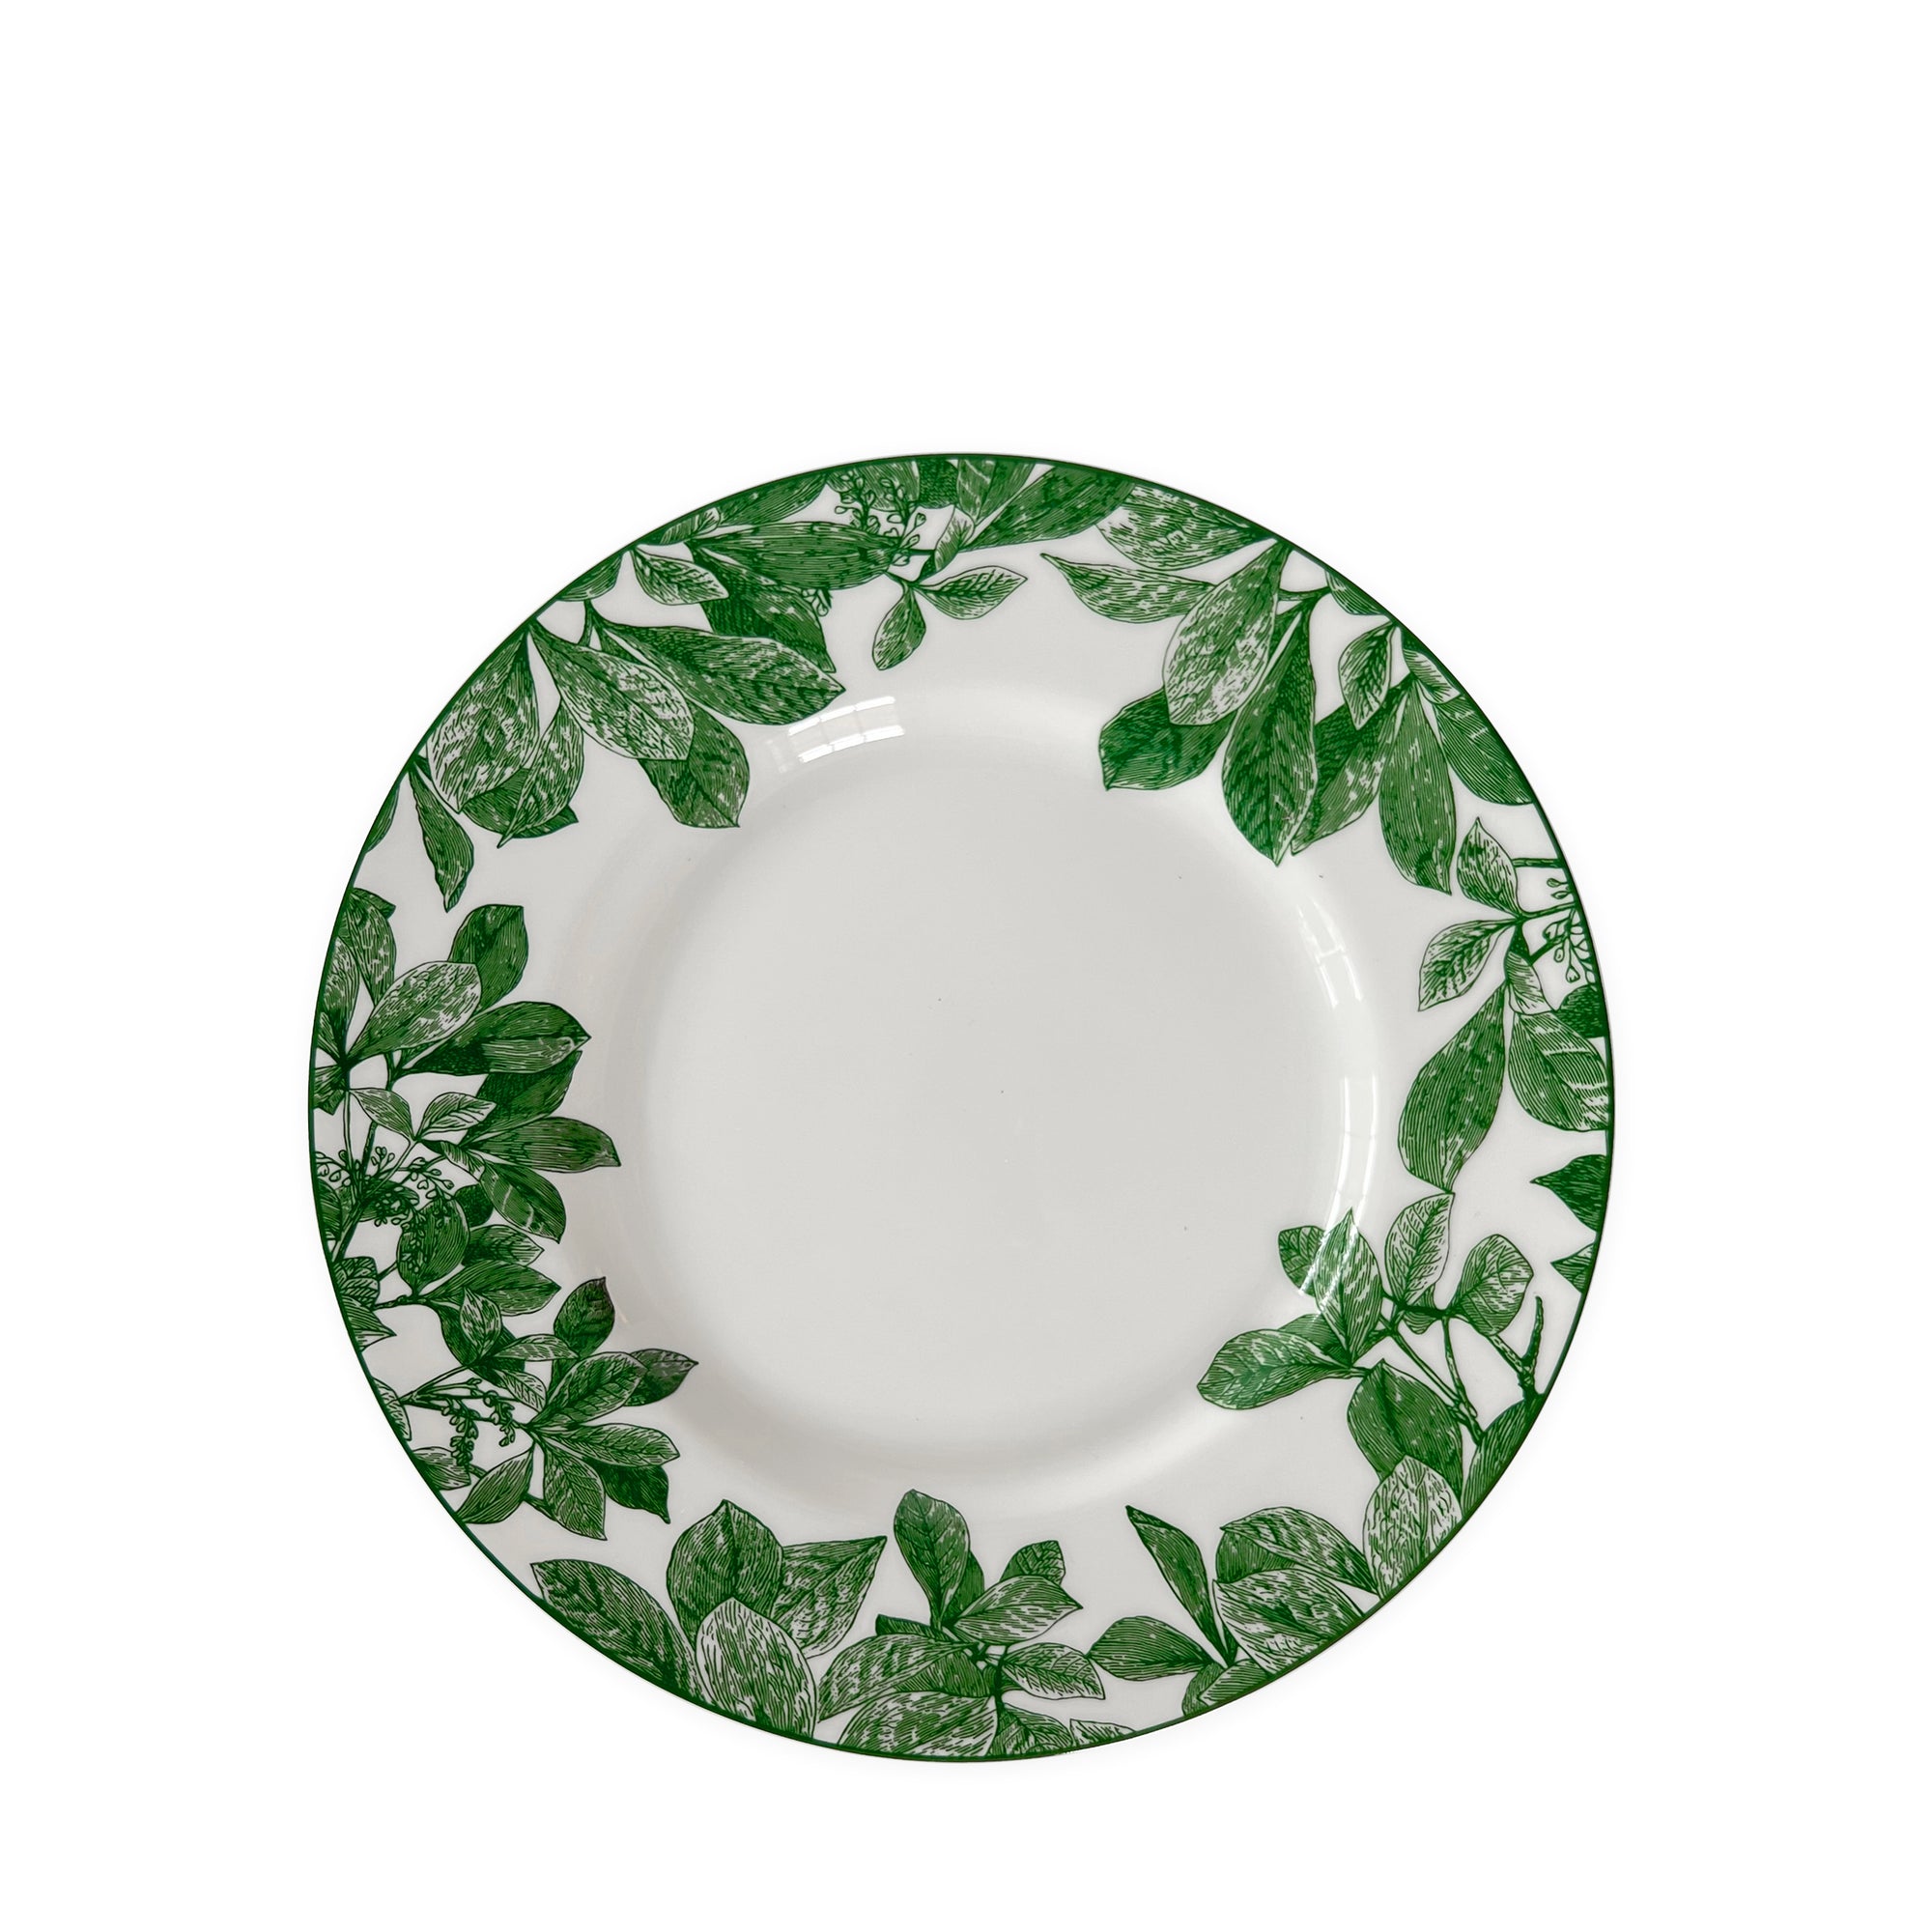 Arbor Green Rimmed Salad Plate with a green leafy pattern around the rim, crafted from premium porcelain, ideal for your Caskata Arbor collection.